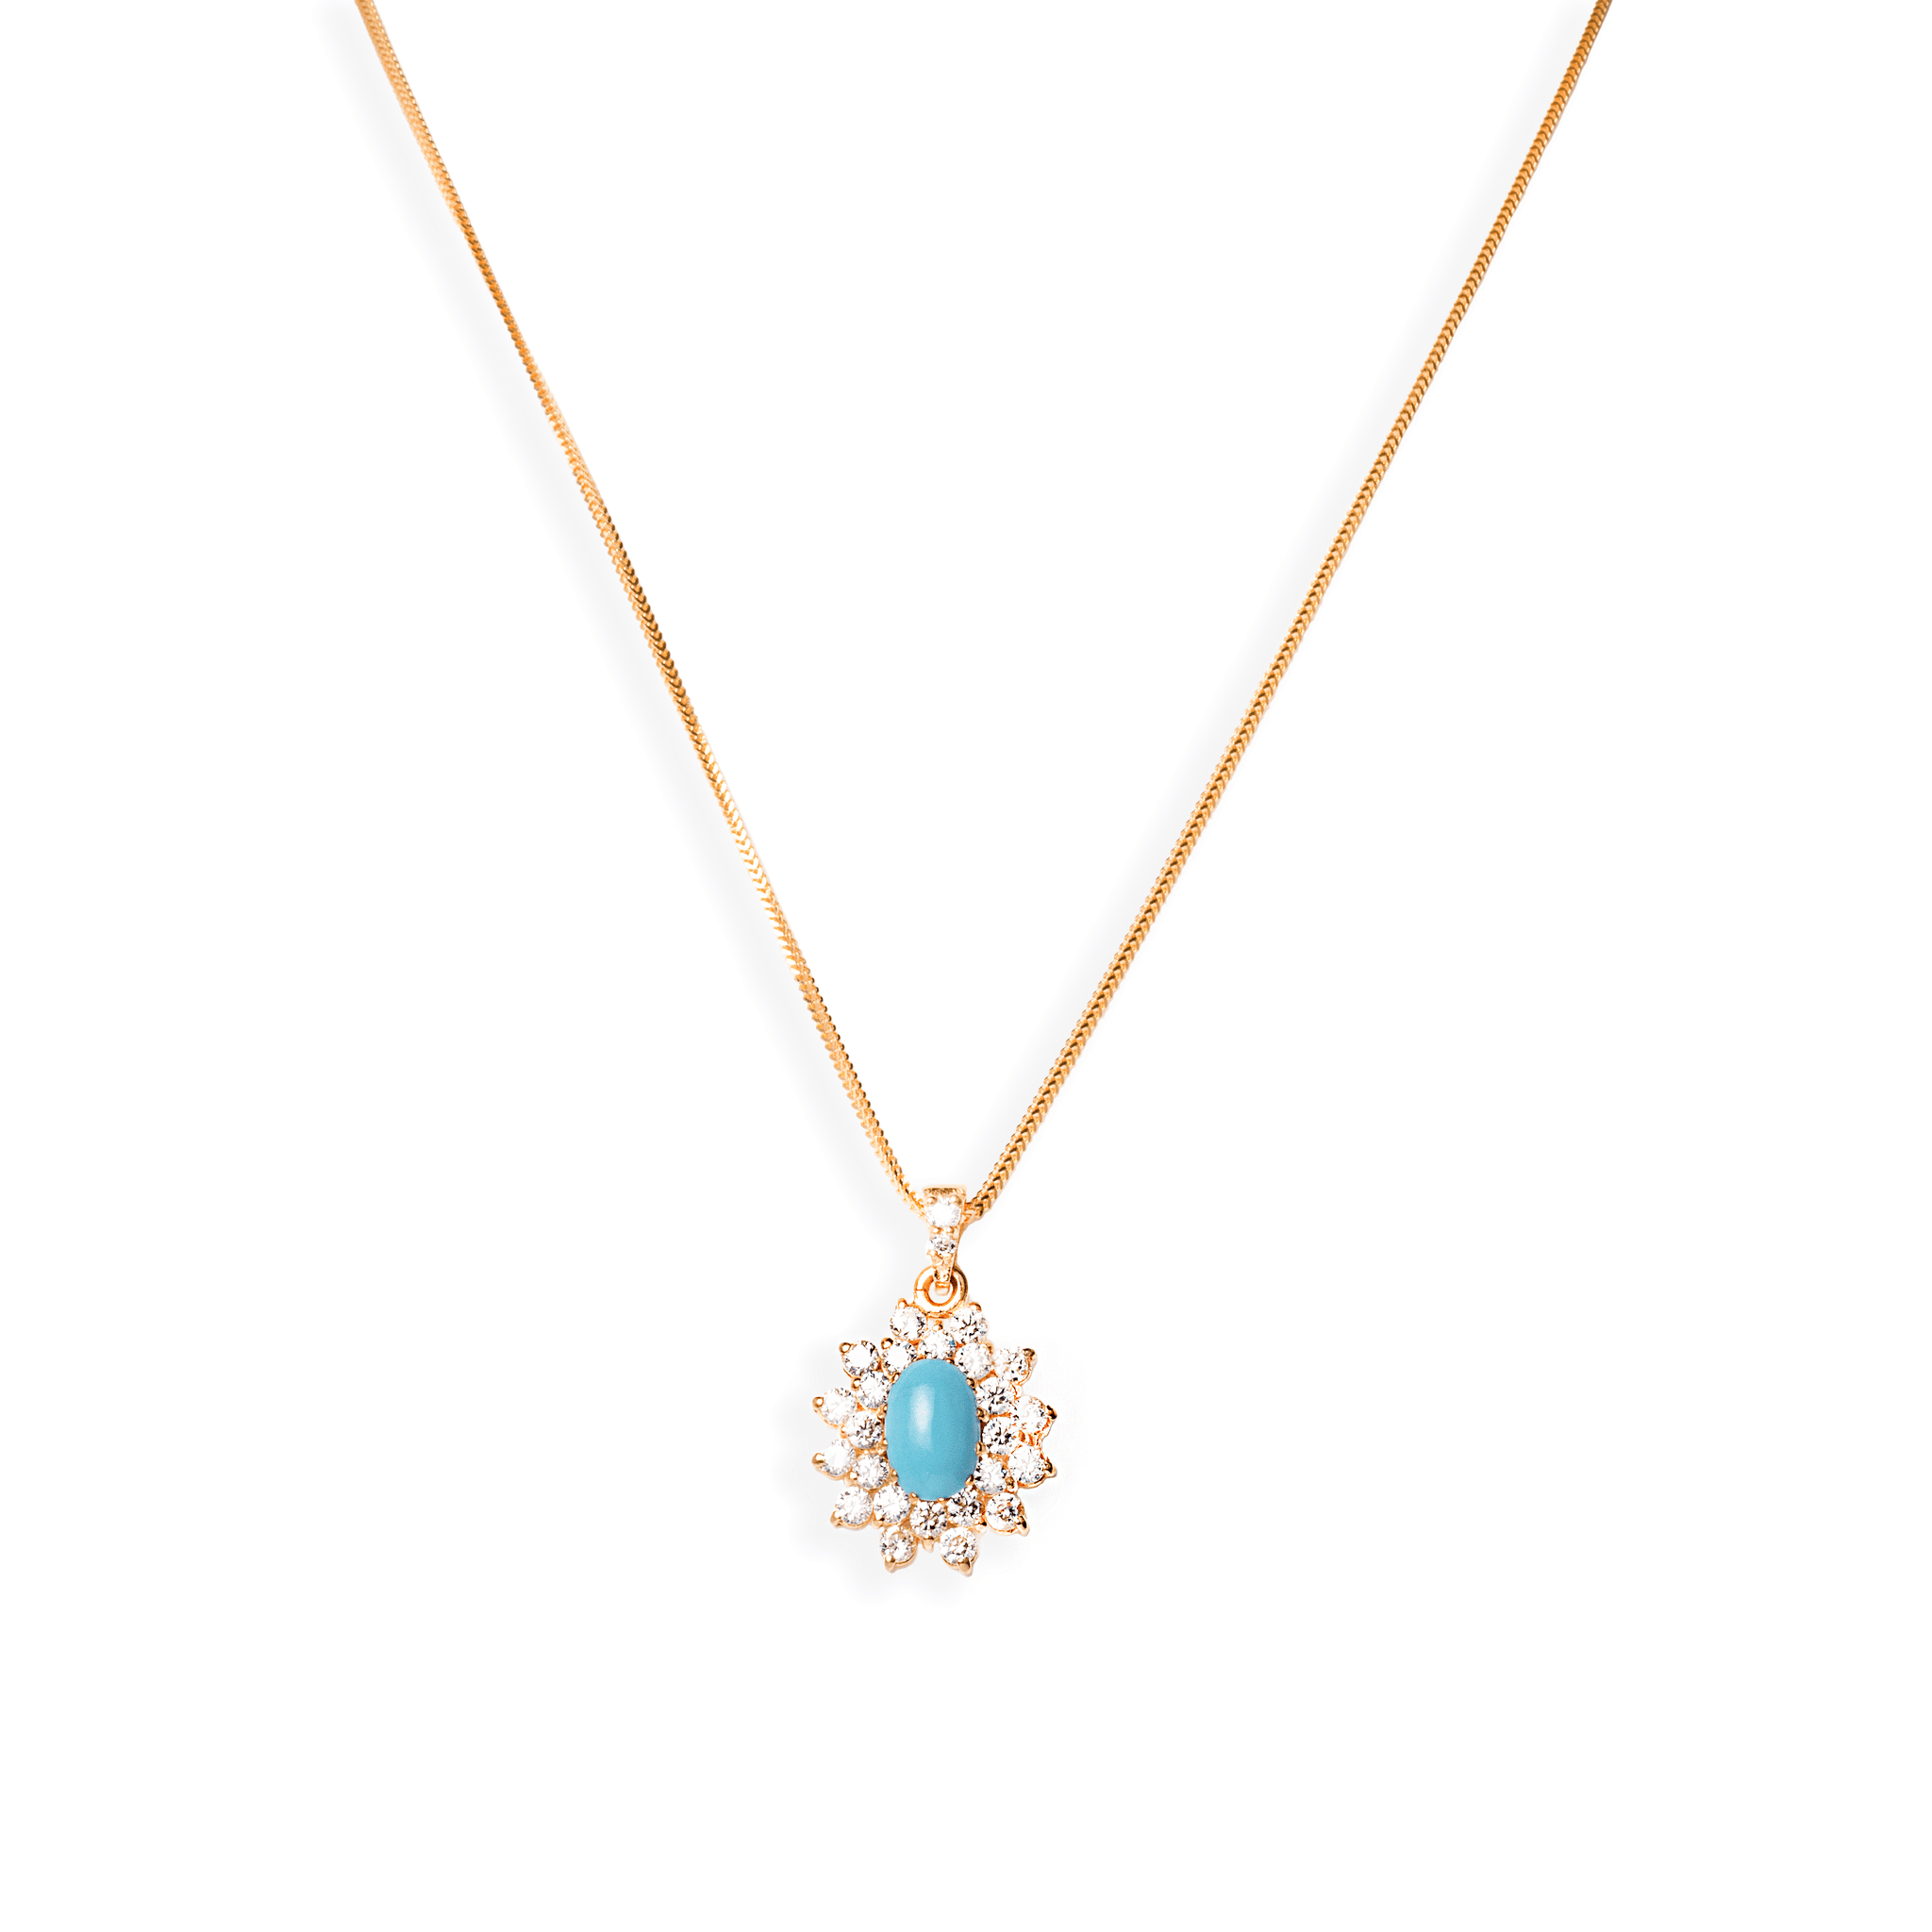 22ct Gold Cubic Zirconia and Turquoise Chain, Pendant and Earrings Set (10.2g) C-3795 P-7300 E-7300